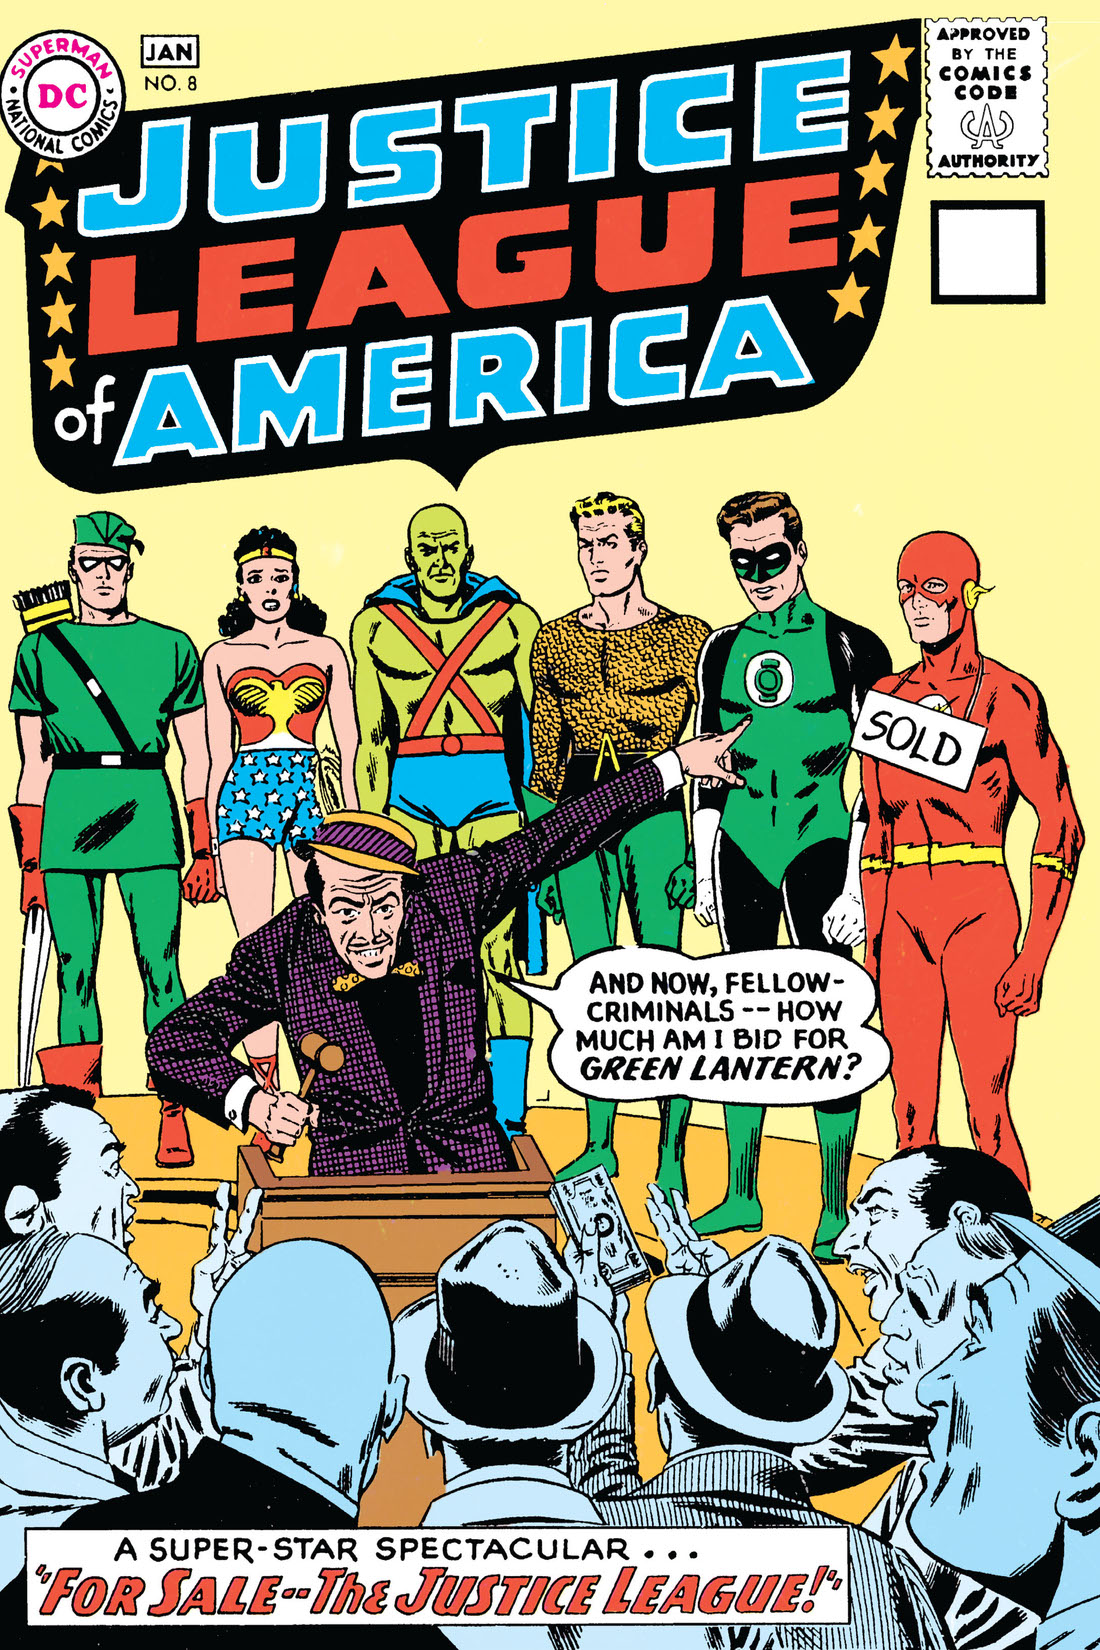 Justice League of America (1960-) #8 preview images